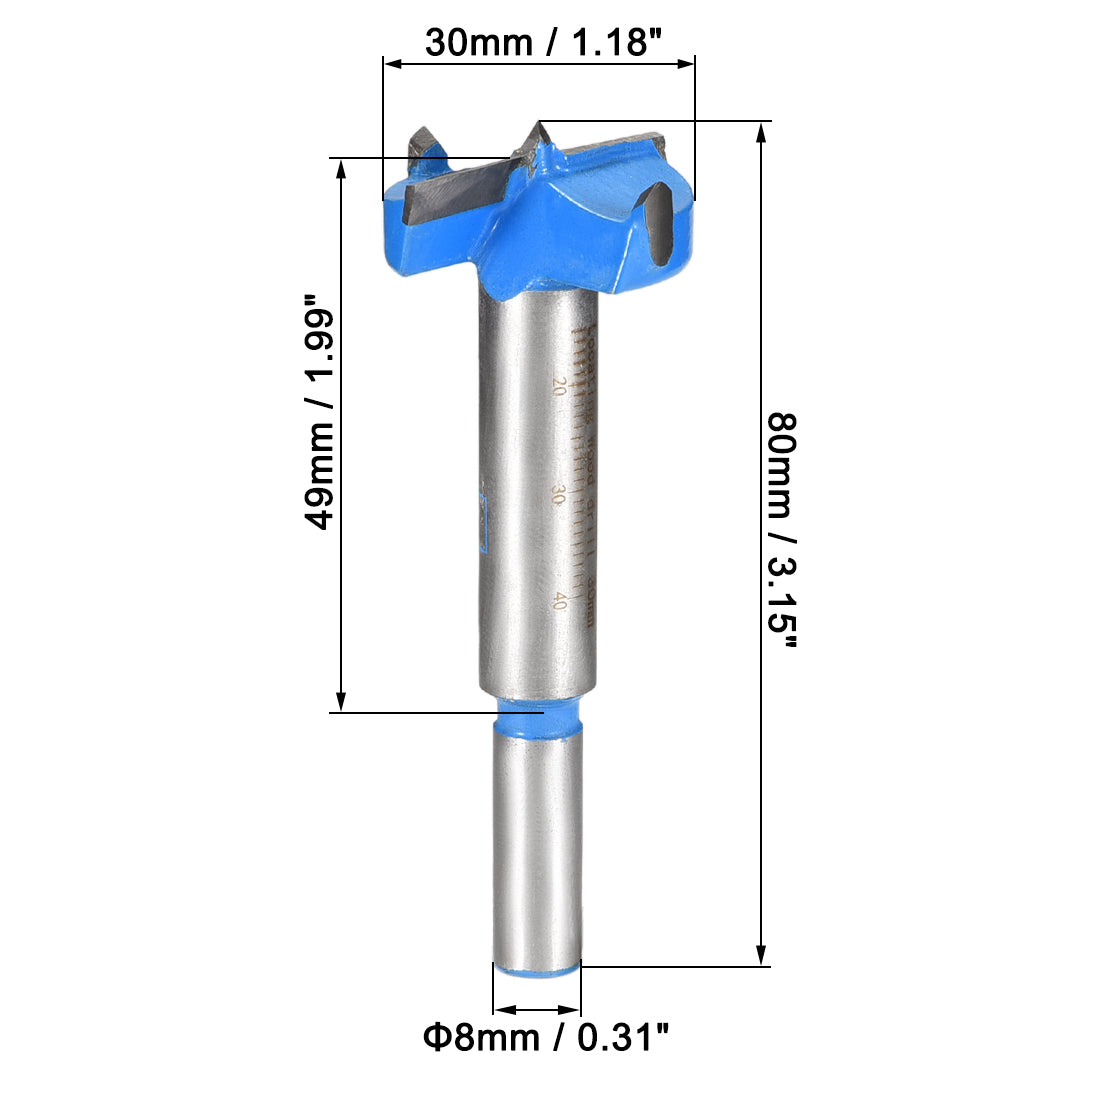 uxcell Uxcell Forstner Wood Boring Drill Bit 30mm Dia. Hole Saw Carbide Alloy Steel Tip Round Shank Cutting for Hinge Plywood Wood Tool Blue 1Set